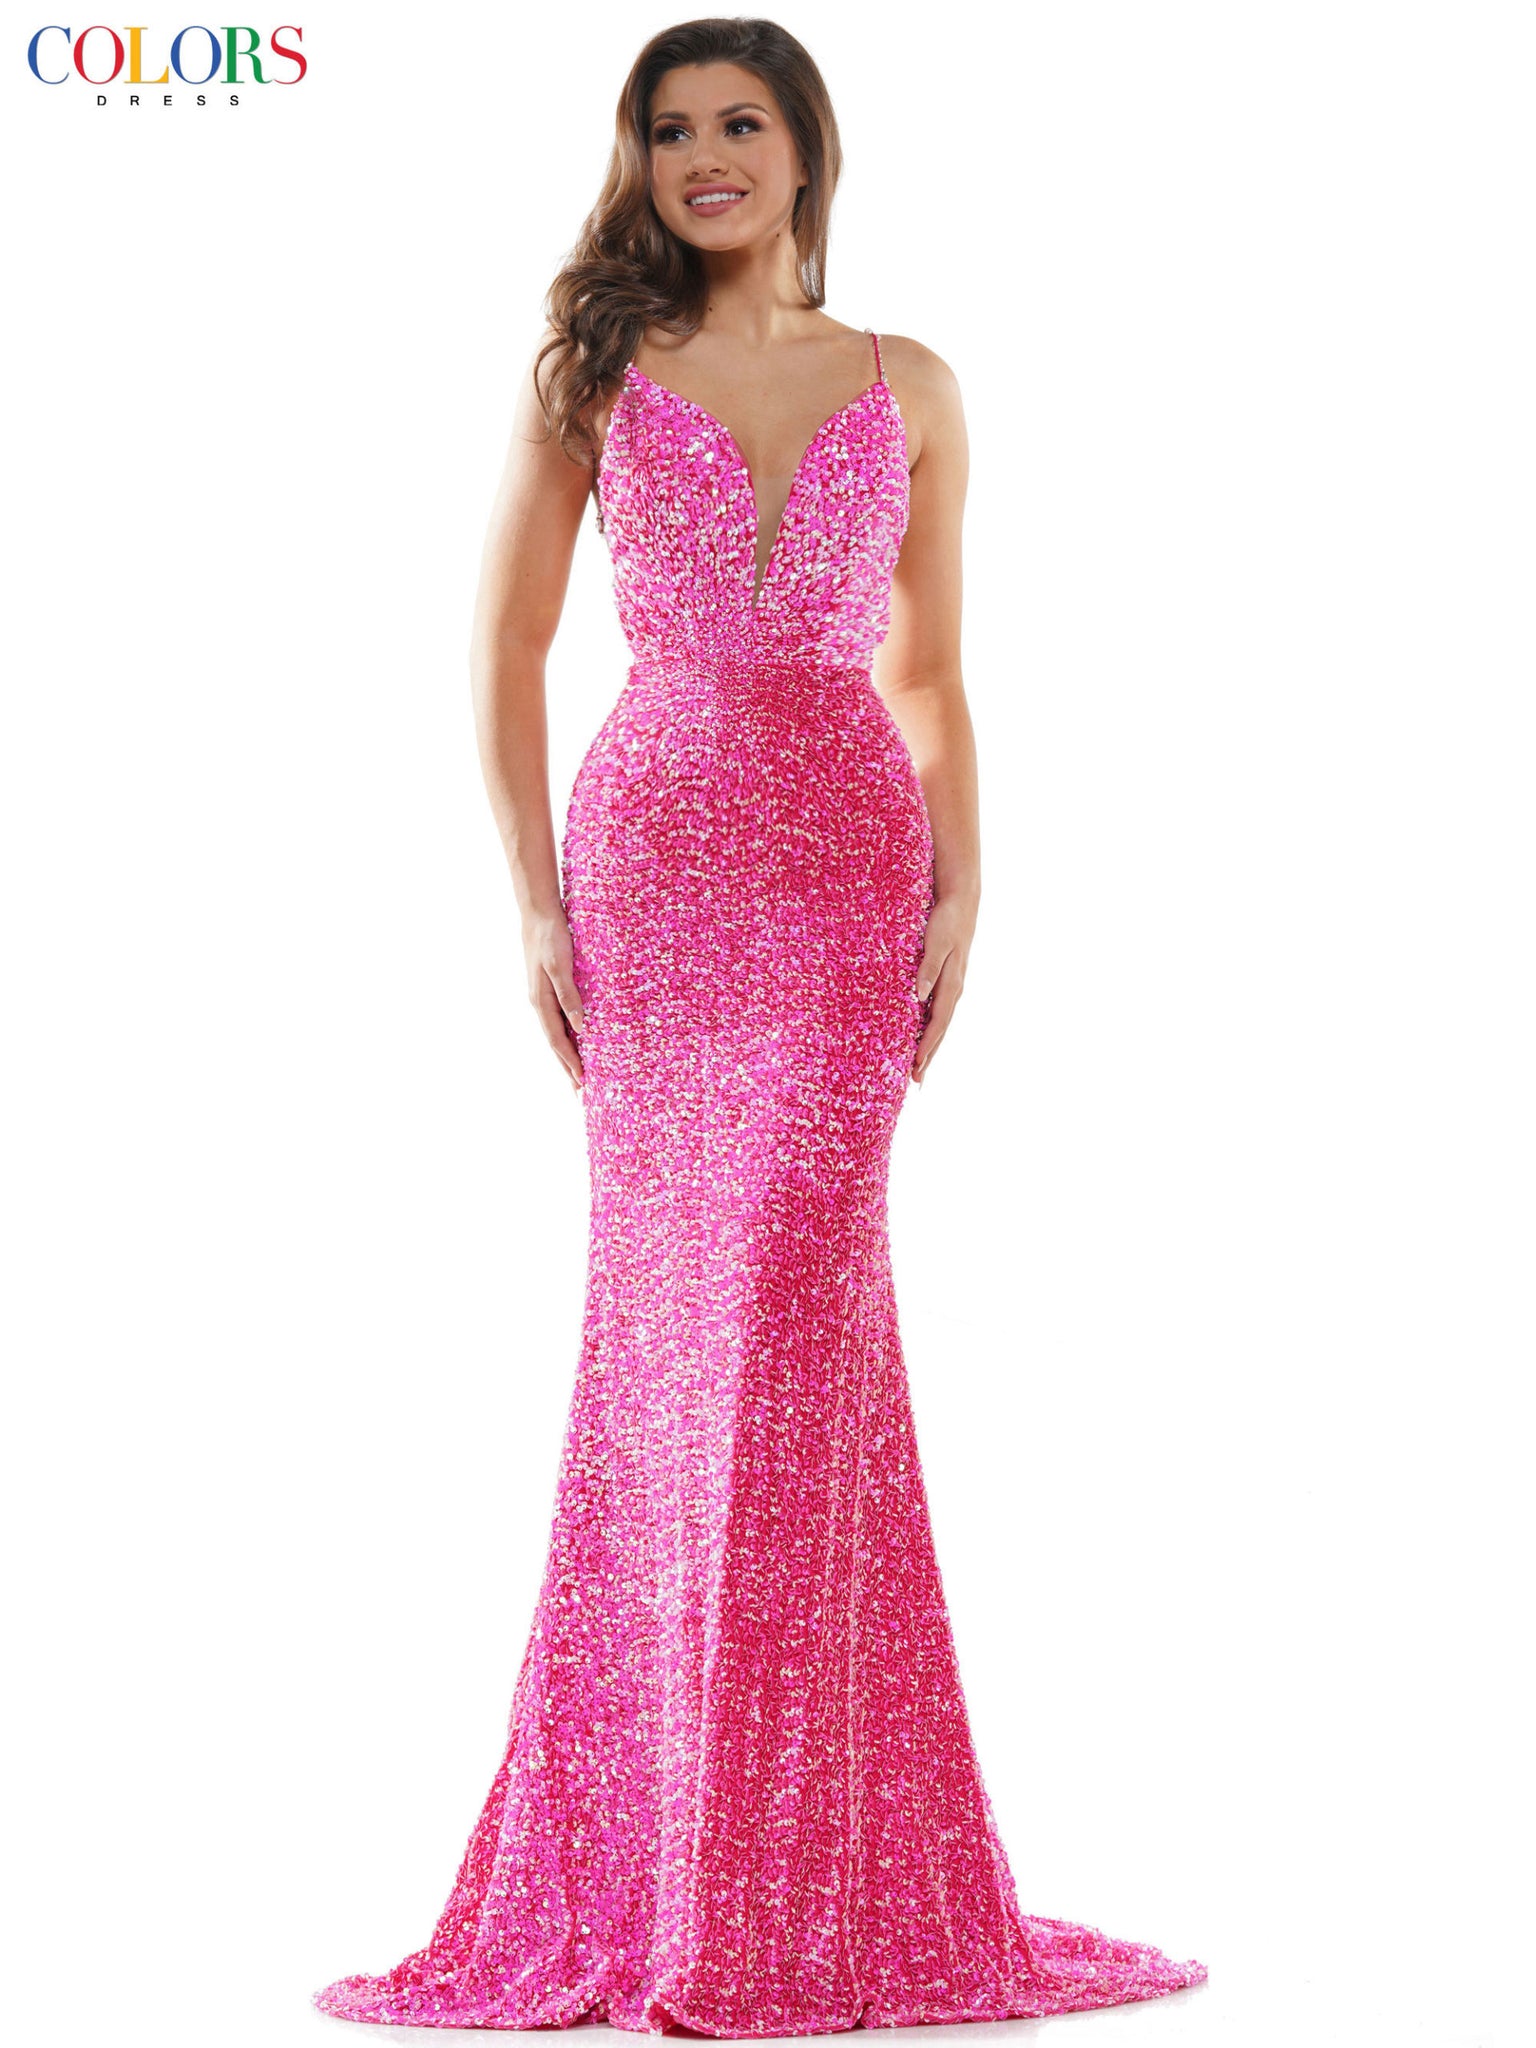 Stunning Sequins by Colors Dress